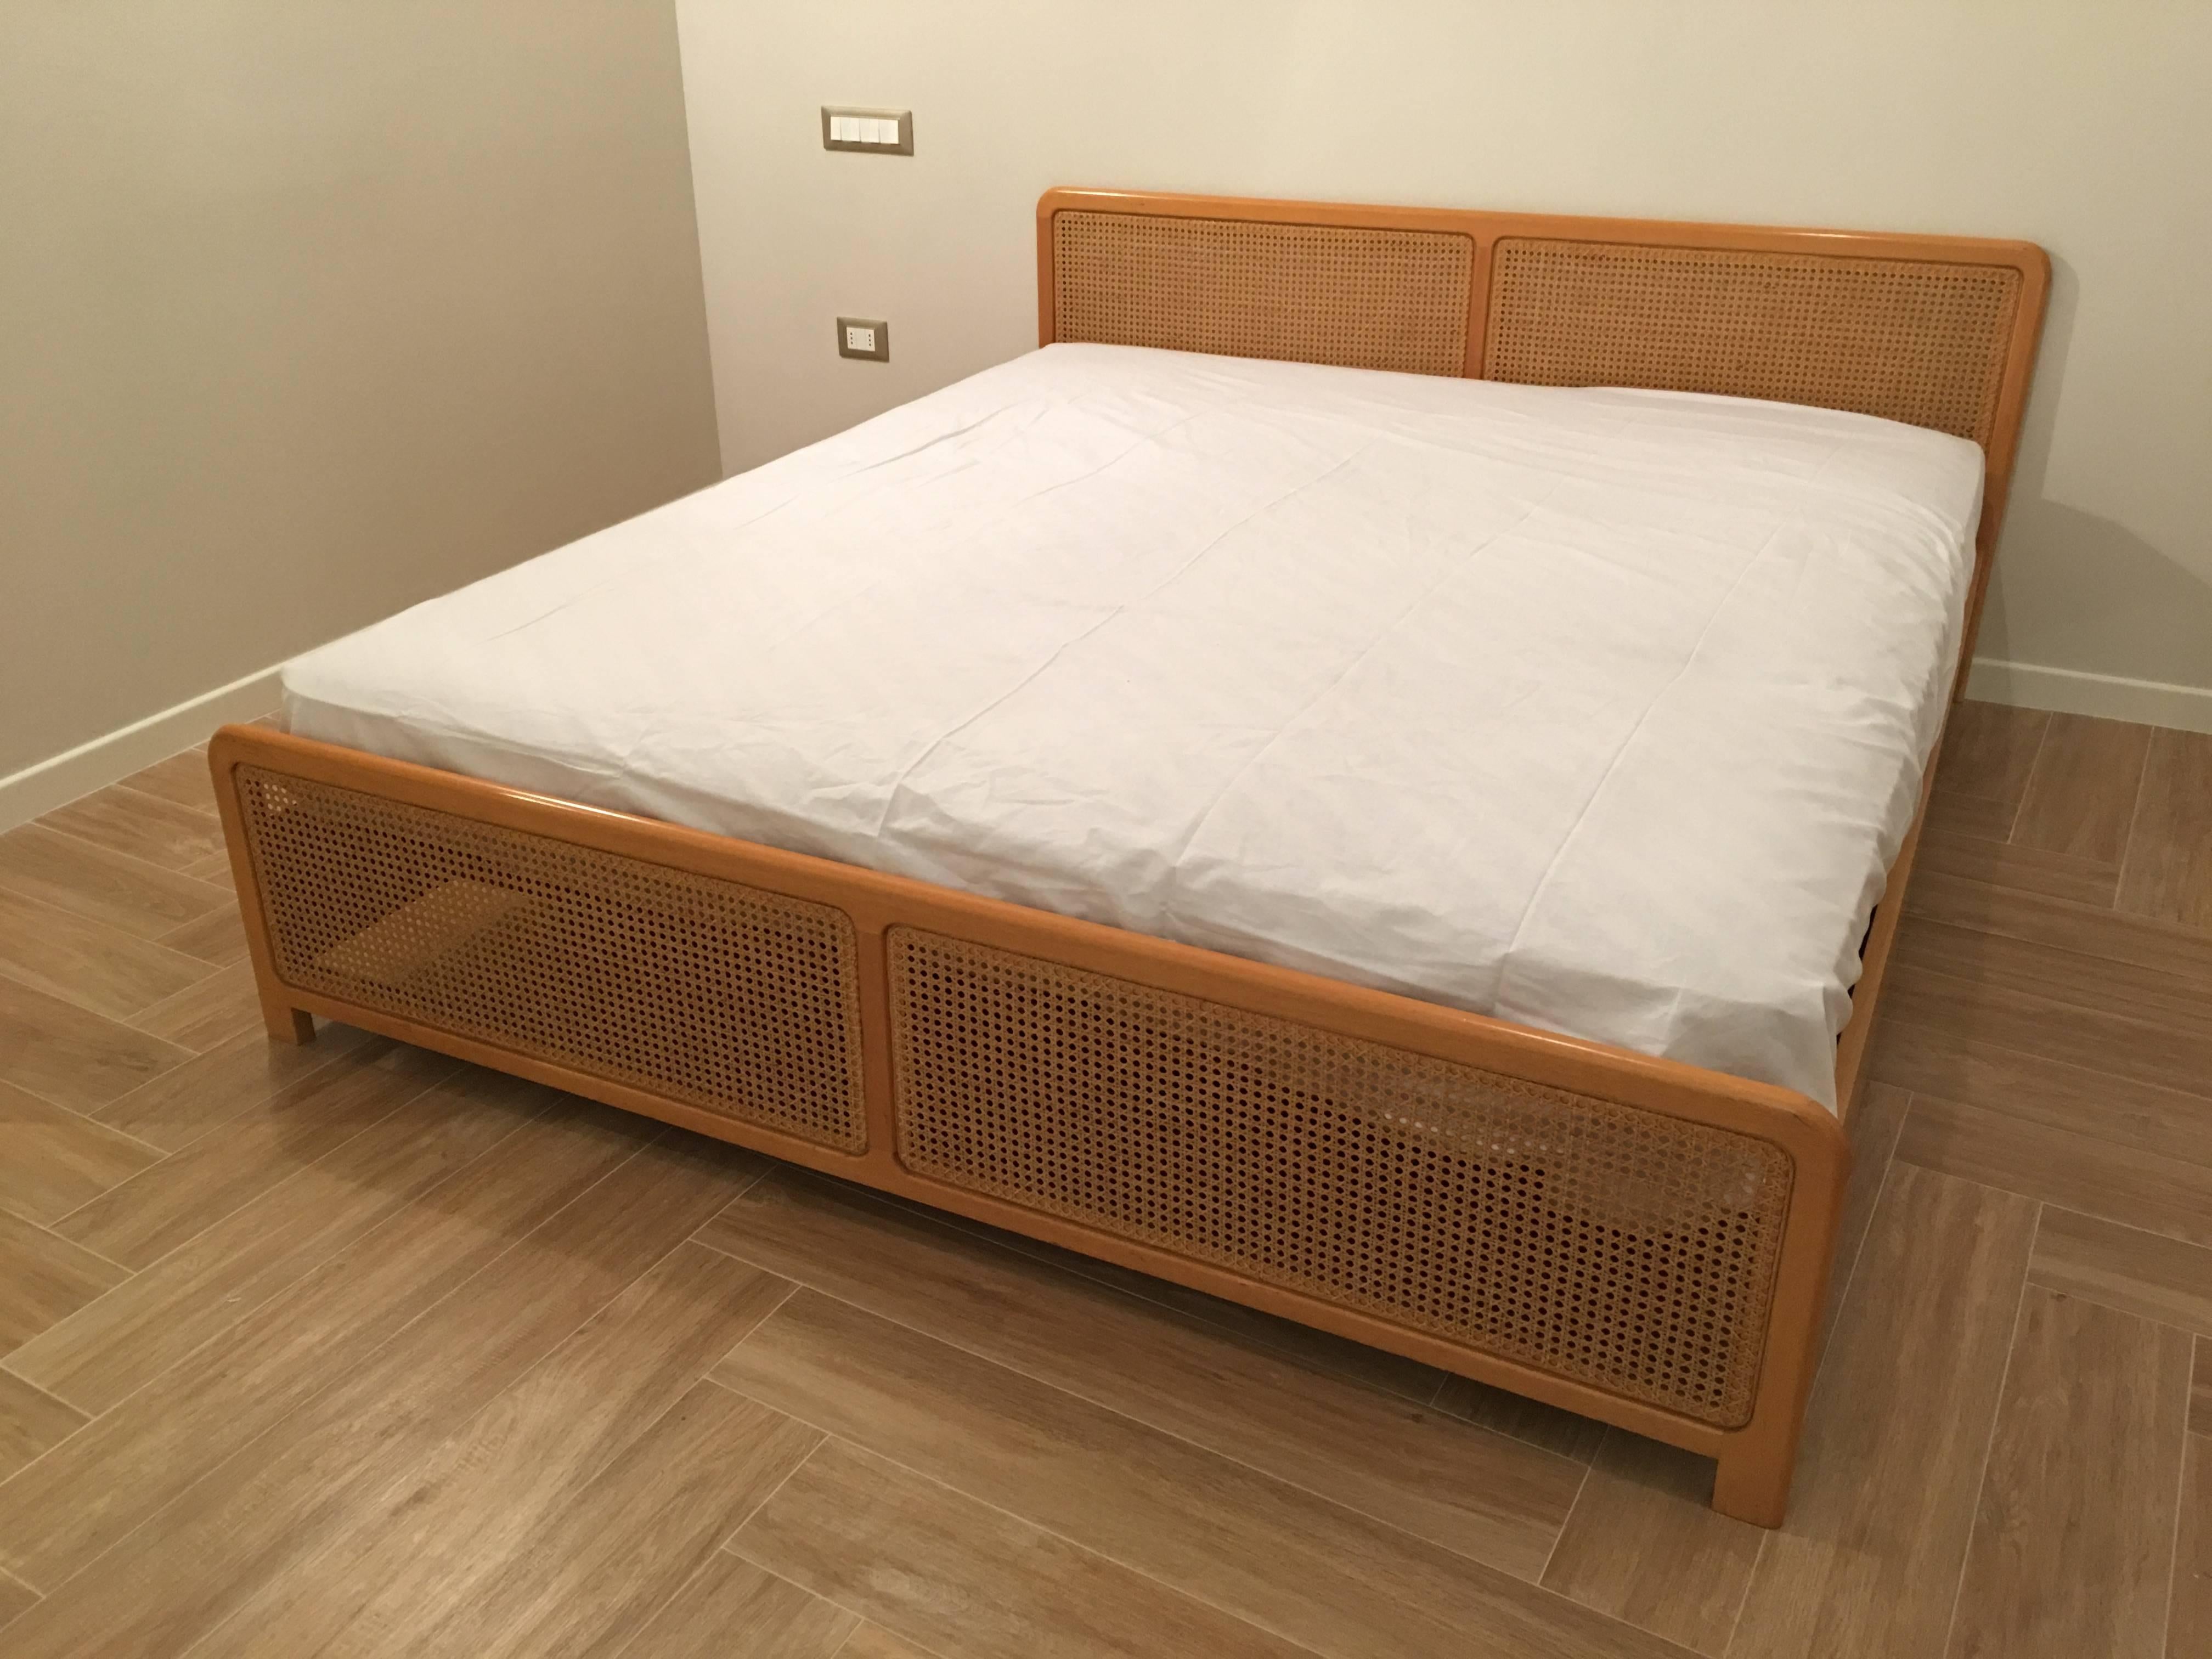 20th Century Wooden Cane Double Bed Frame